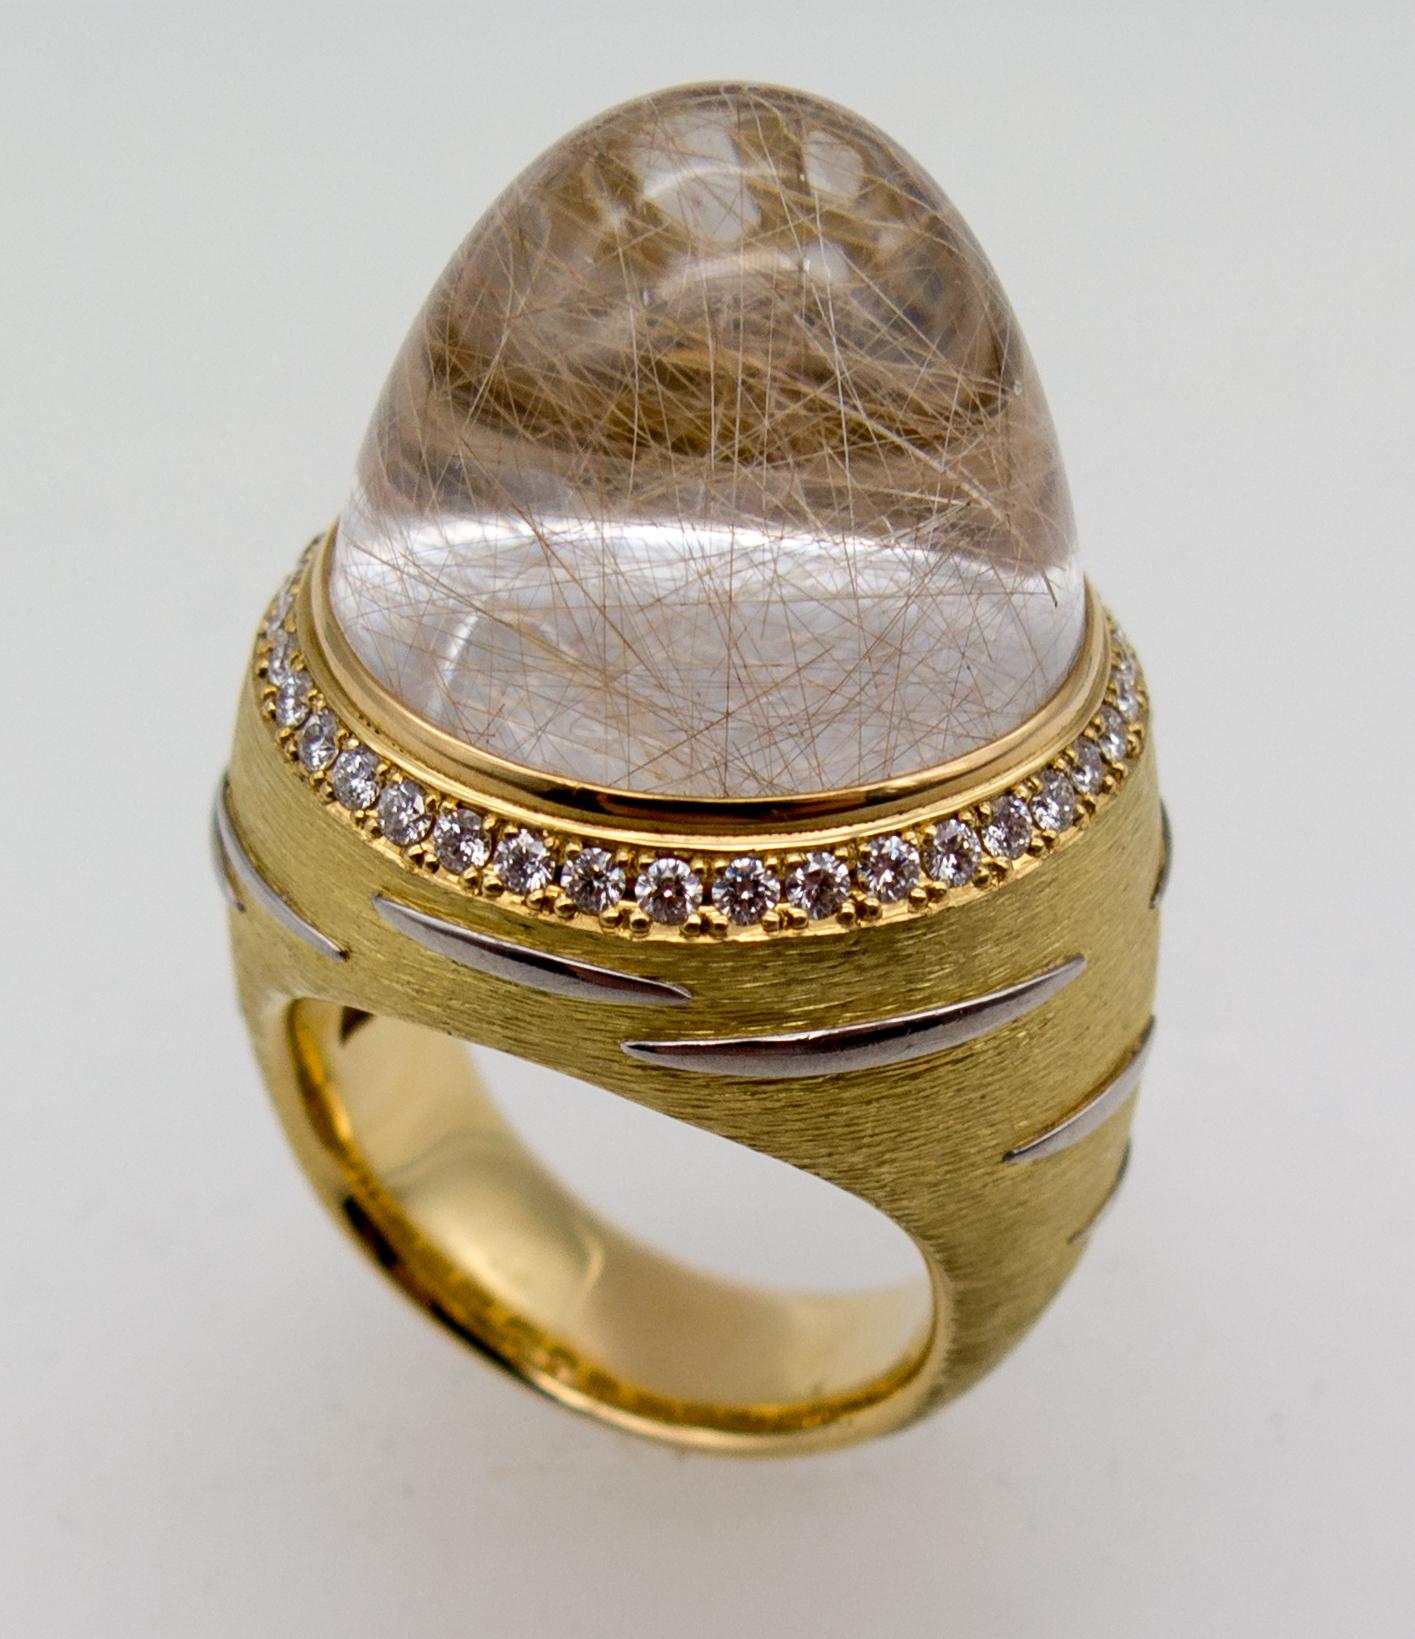 An eye catching and unusual dinner ring featuring a huge dome of rutilated quartz.   it looks like threads floating through vodka or gin, and in fact, it's threads of rutile needle inclusions floating in a suspension of crystal created underground 